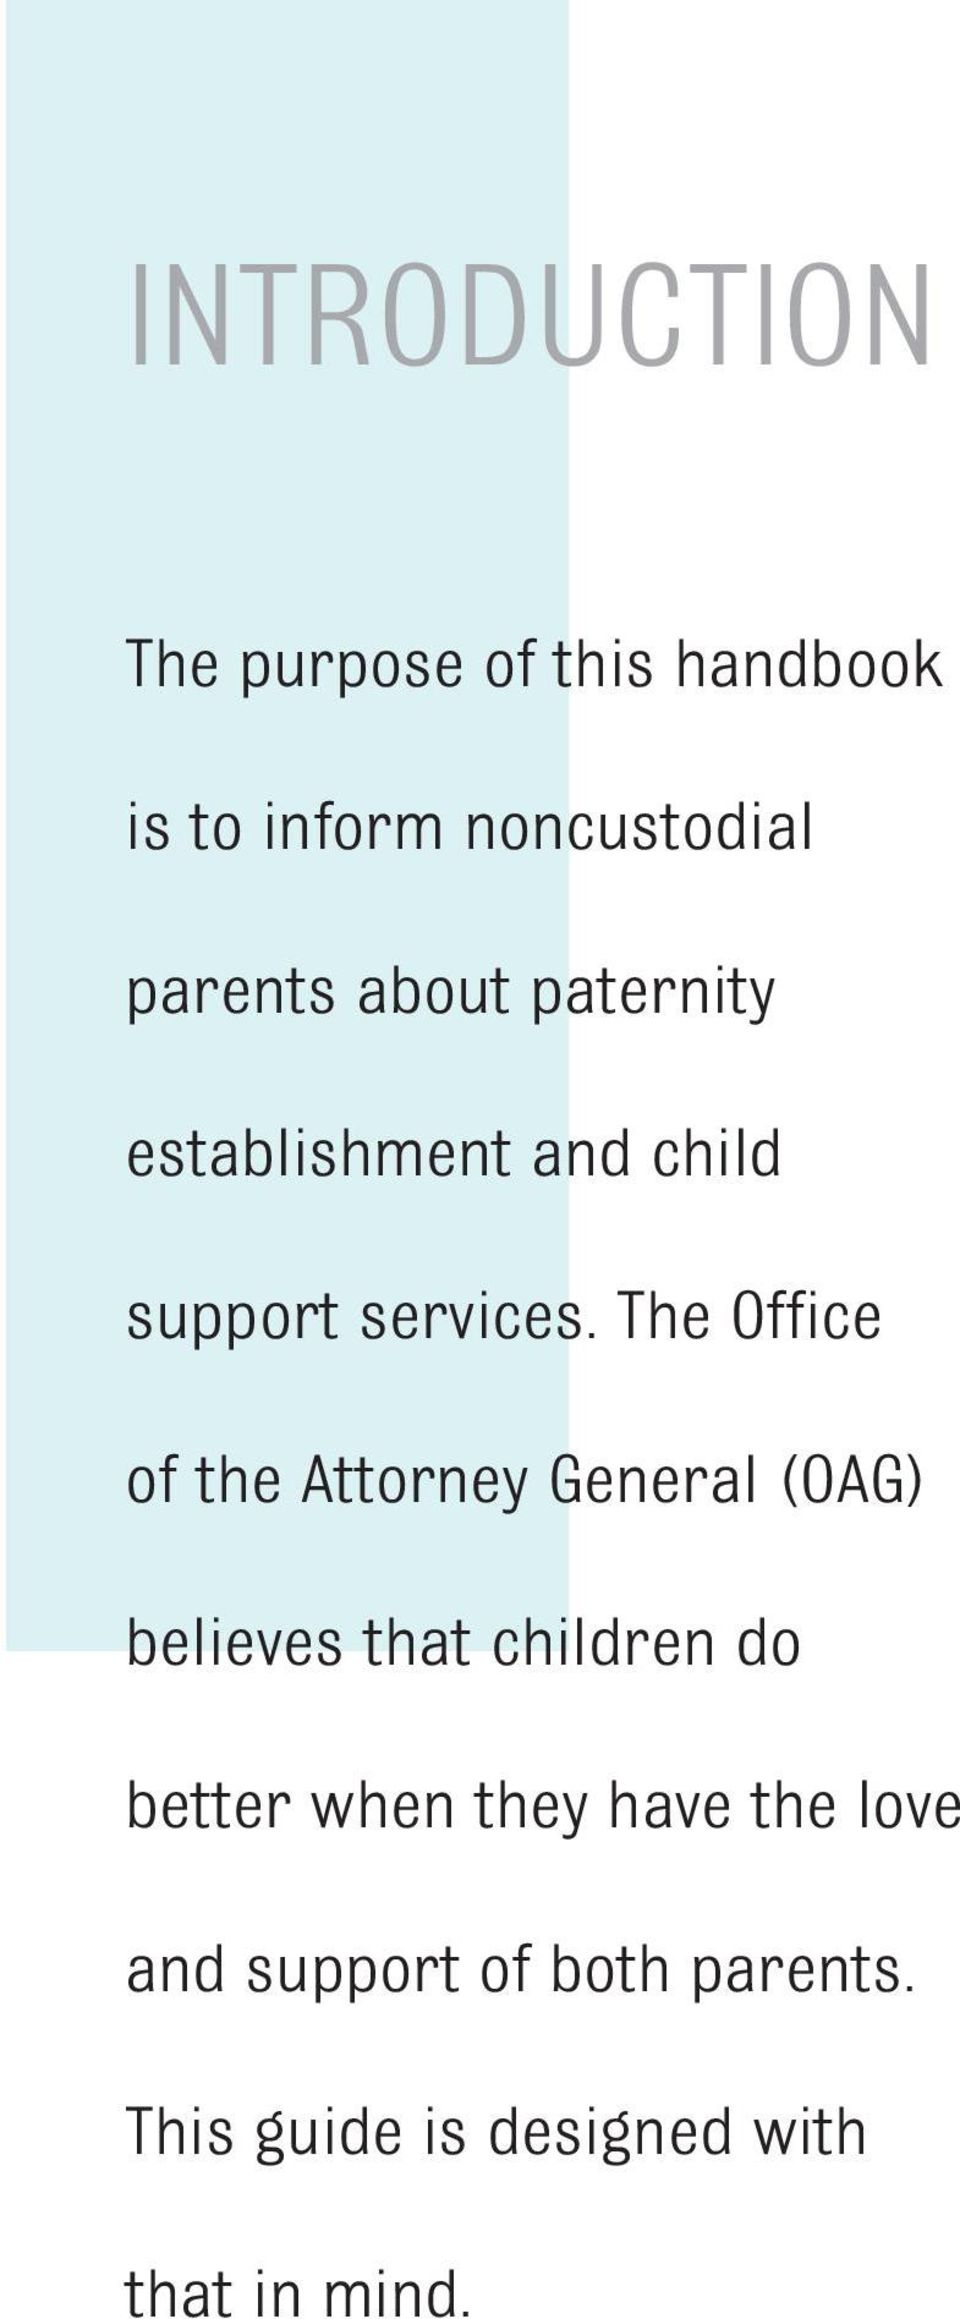 The Office of the Attorney General (OAG) believes that children do better